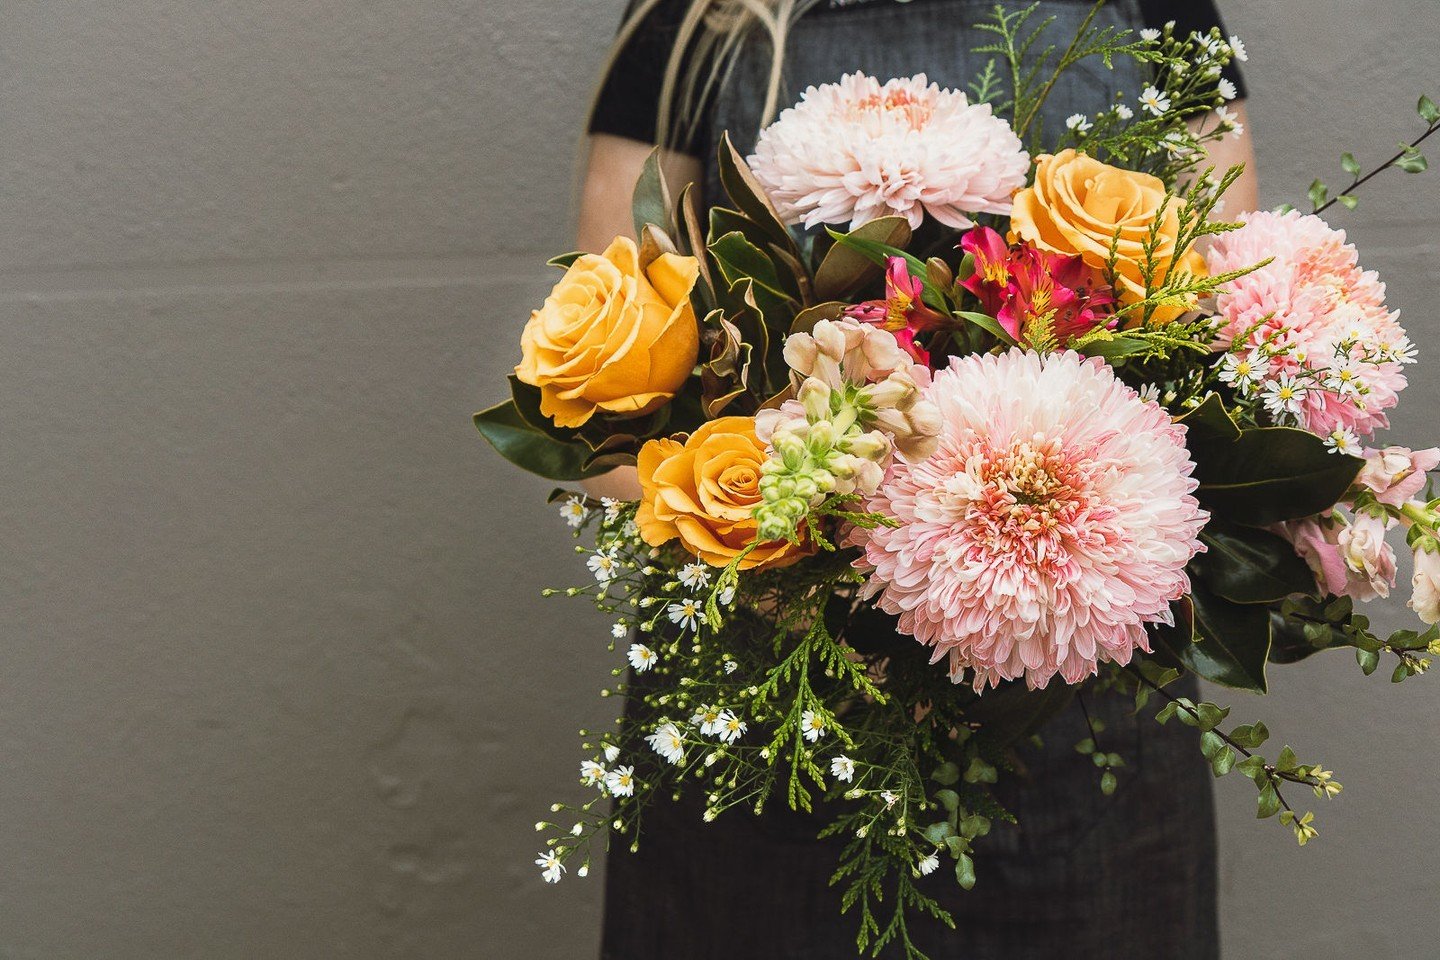 The 'Cheerful &amp; Bright' Bouquets are the perfect Mother's Day gift to brighten Mum's day. 

Order online today #localflorist #orderonline #flowers #bouquet #bunchofflowers #gifts #vintagegifts #boutiqueflorist #noosa #noosaflorist 🌷